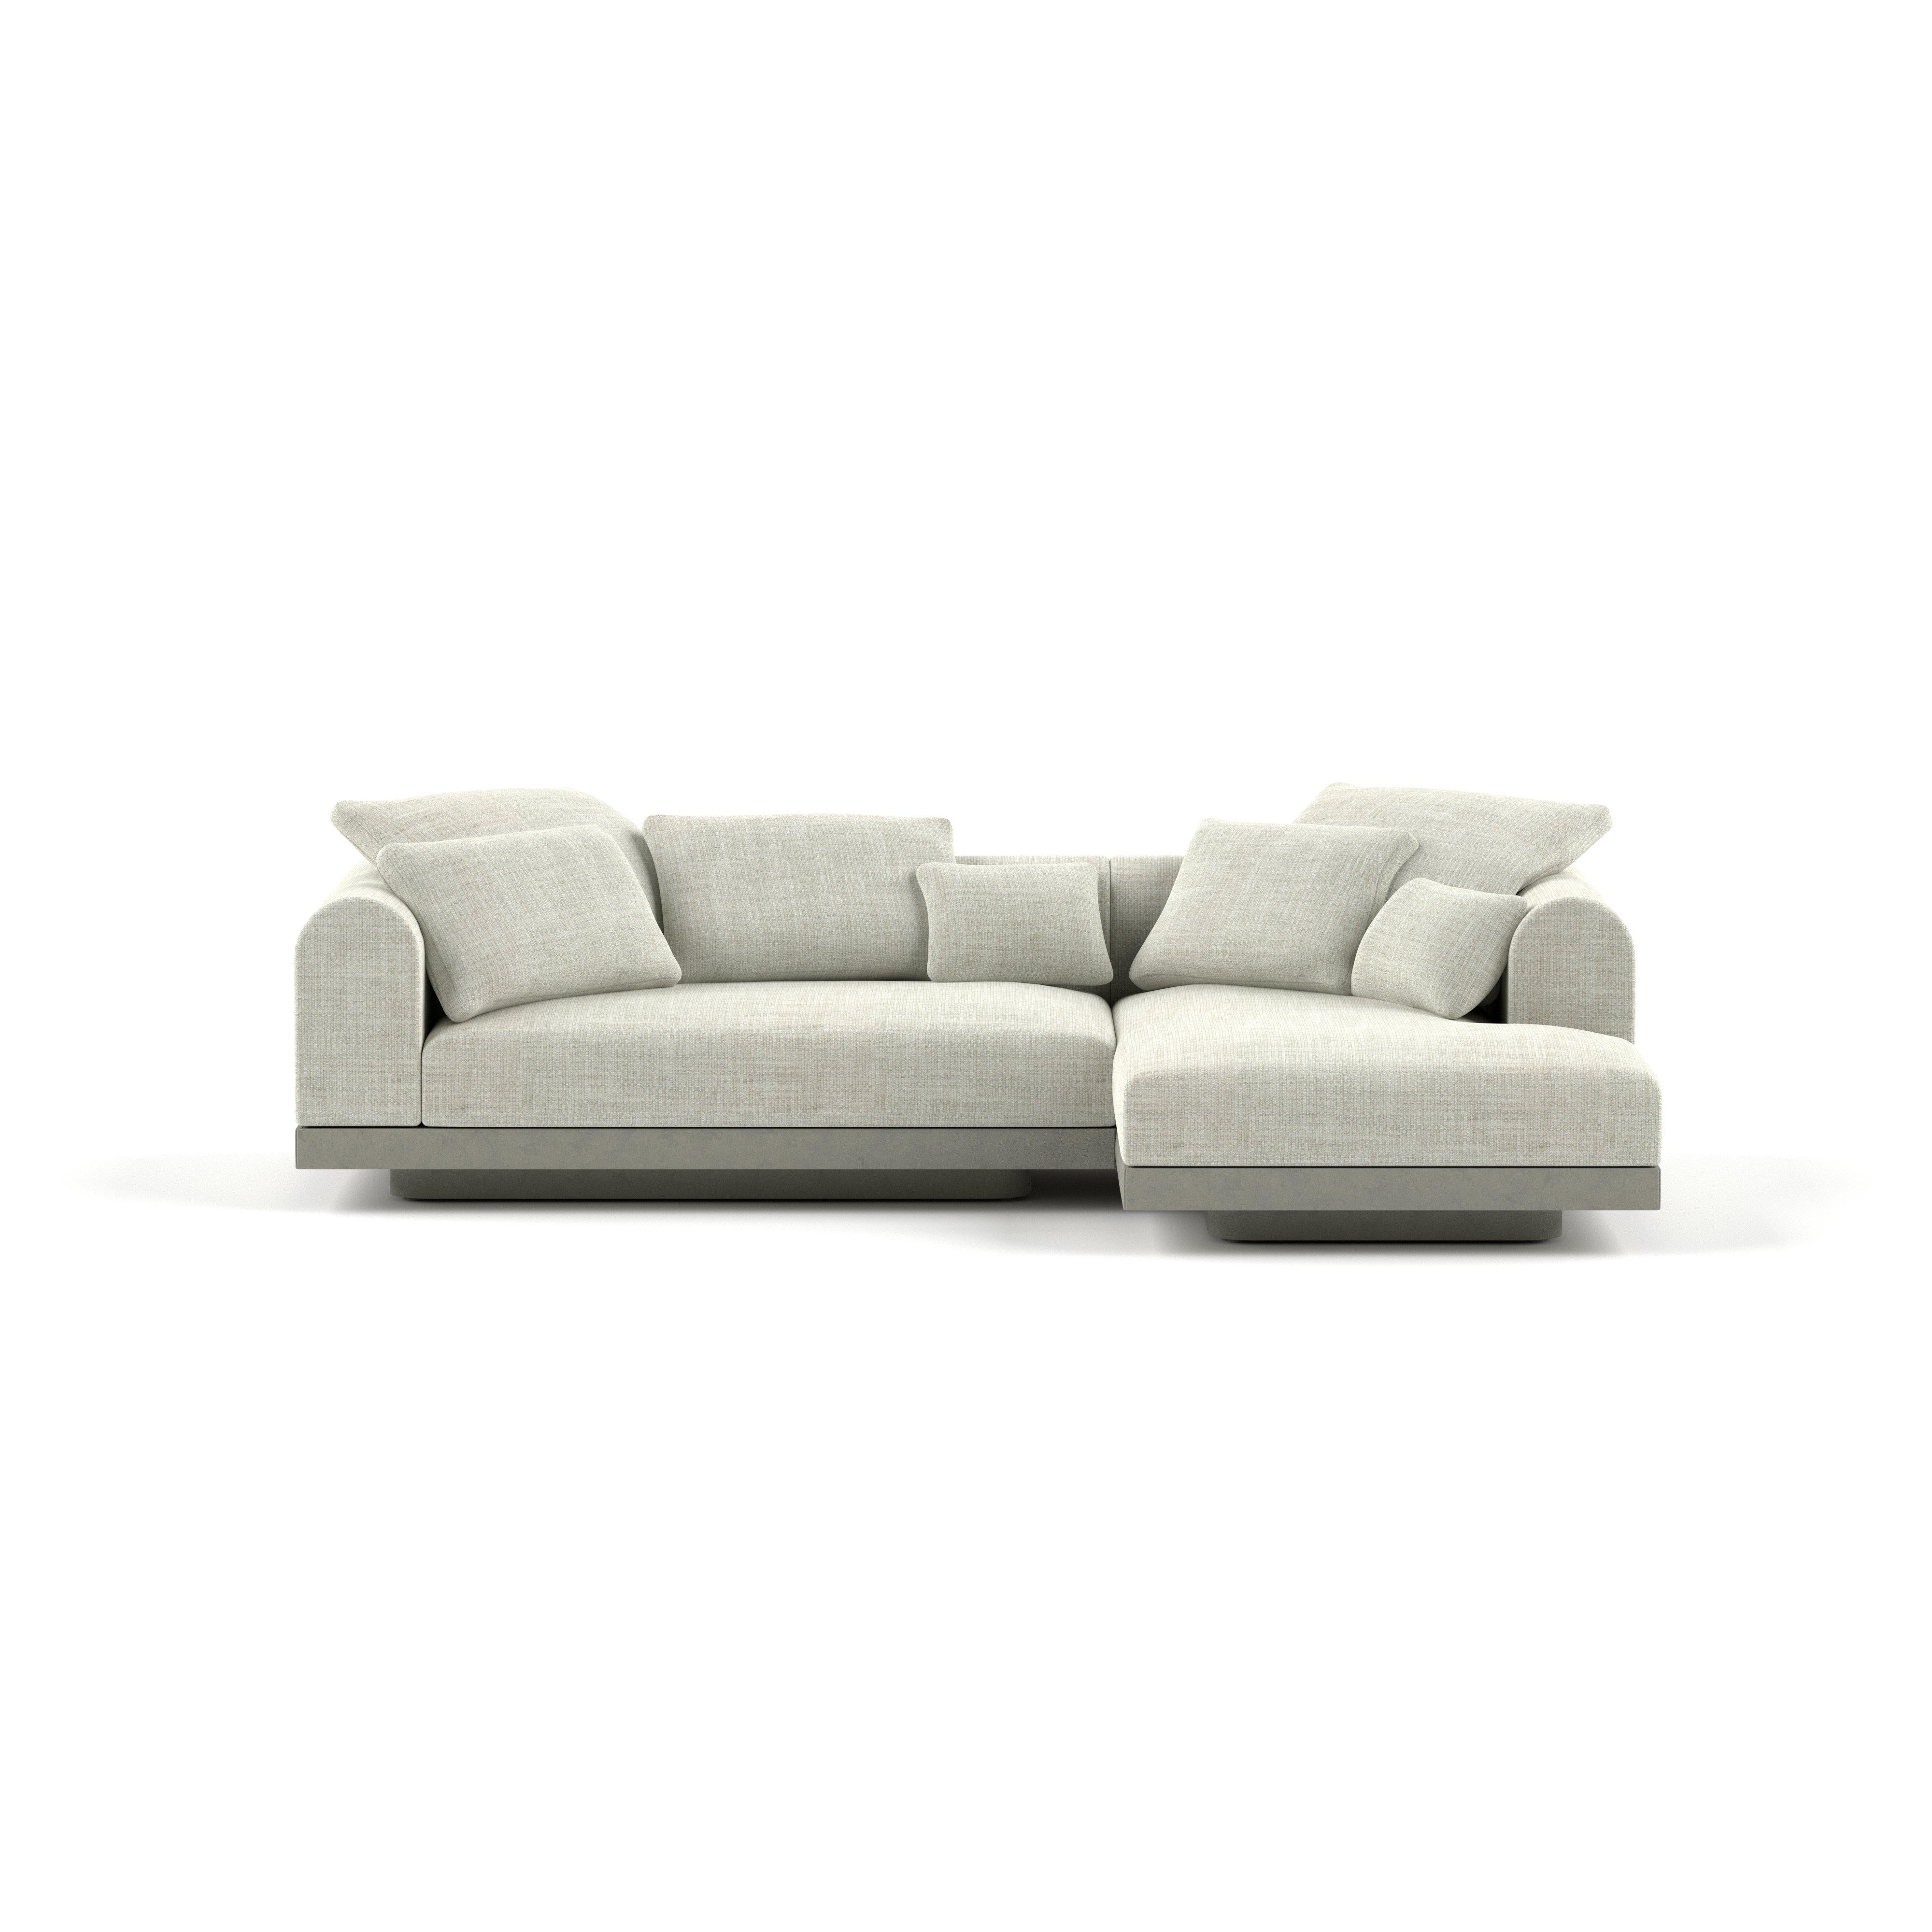 'Aqueduct' Contemporary Sofa by Poiat, Setup 1, Yang 95, Low Plinth For Sale 2